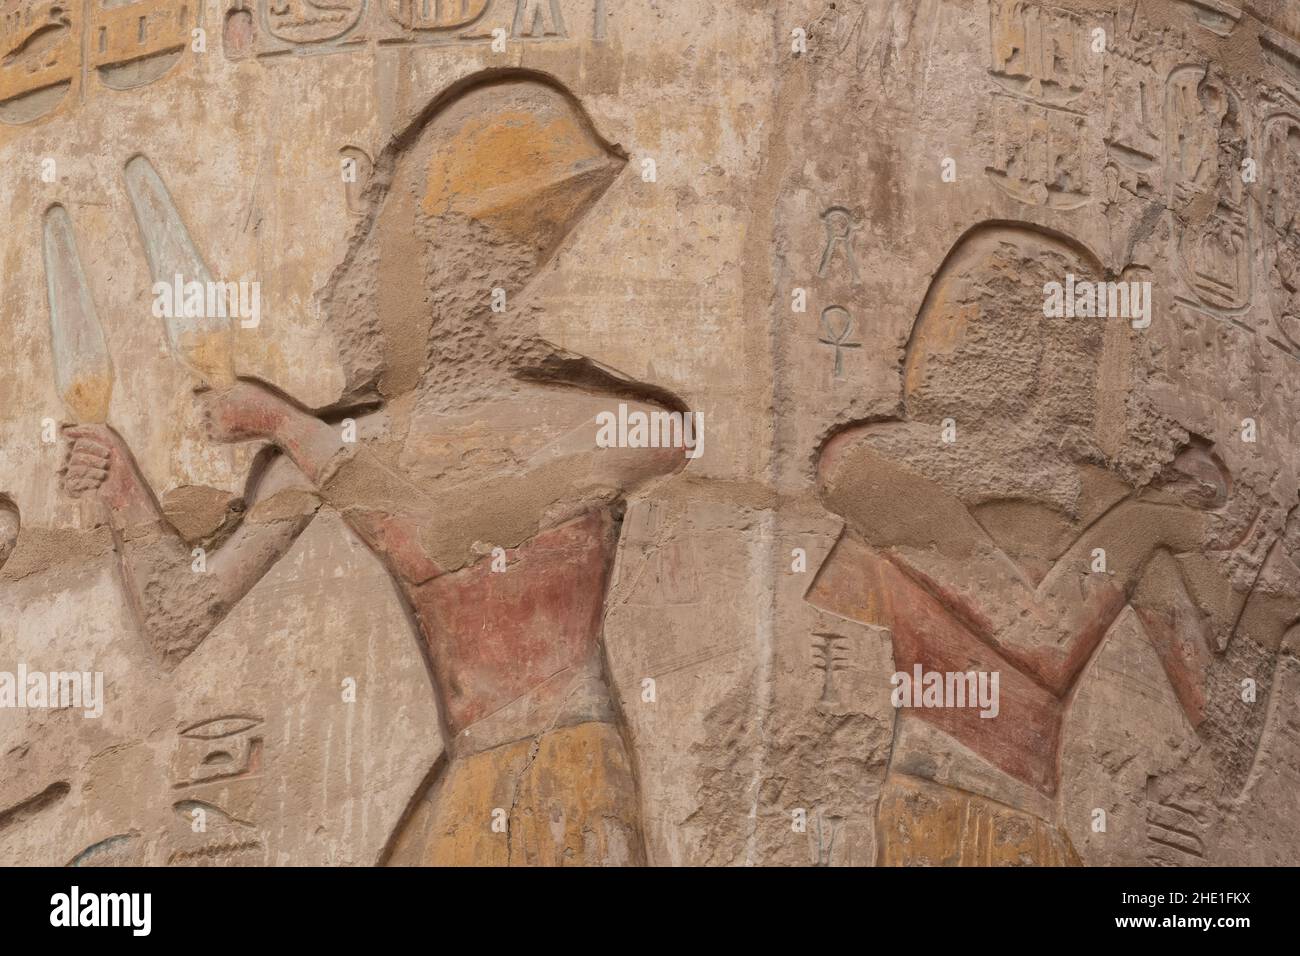 Figures in the Hypostyle hall at Karnak temple, the relief sculptures are well preserved even retaining paint although the faces were chipped off. Stock Photo